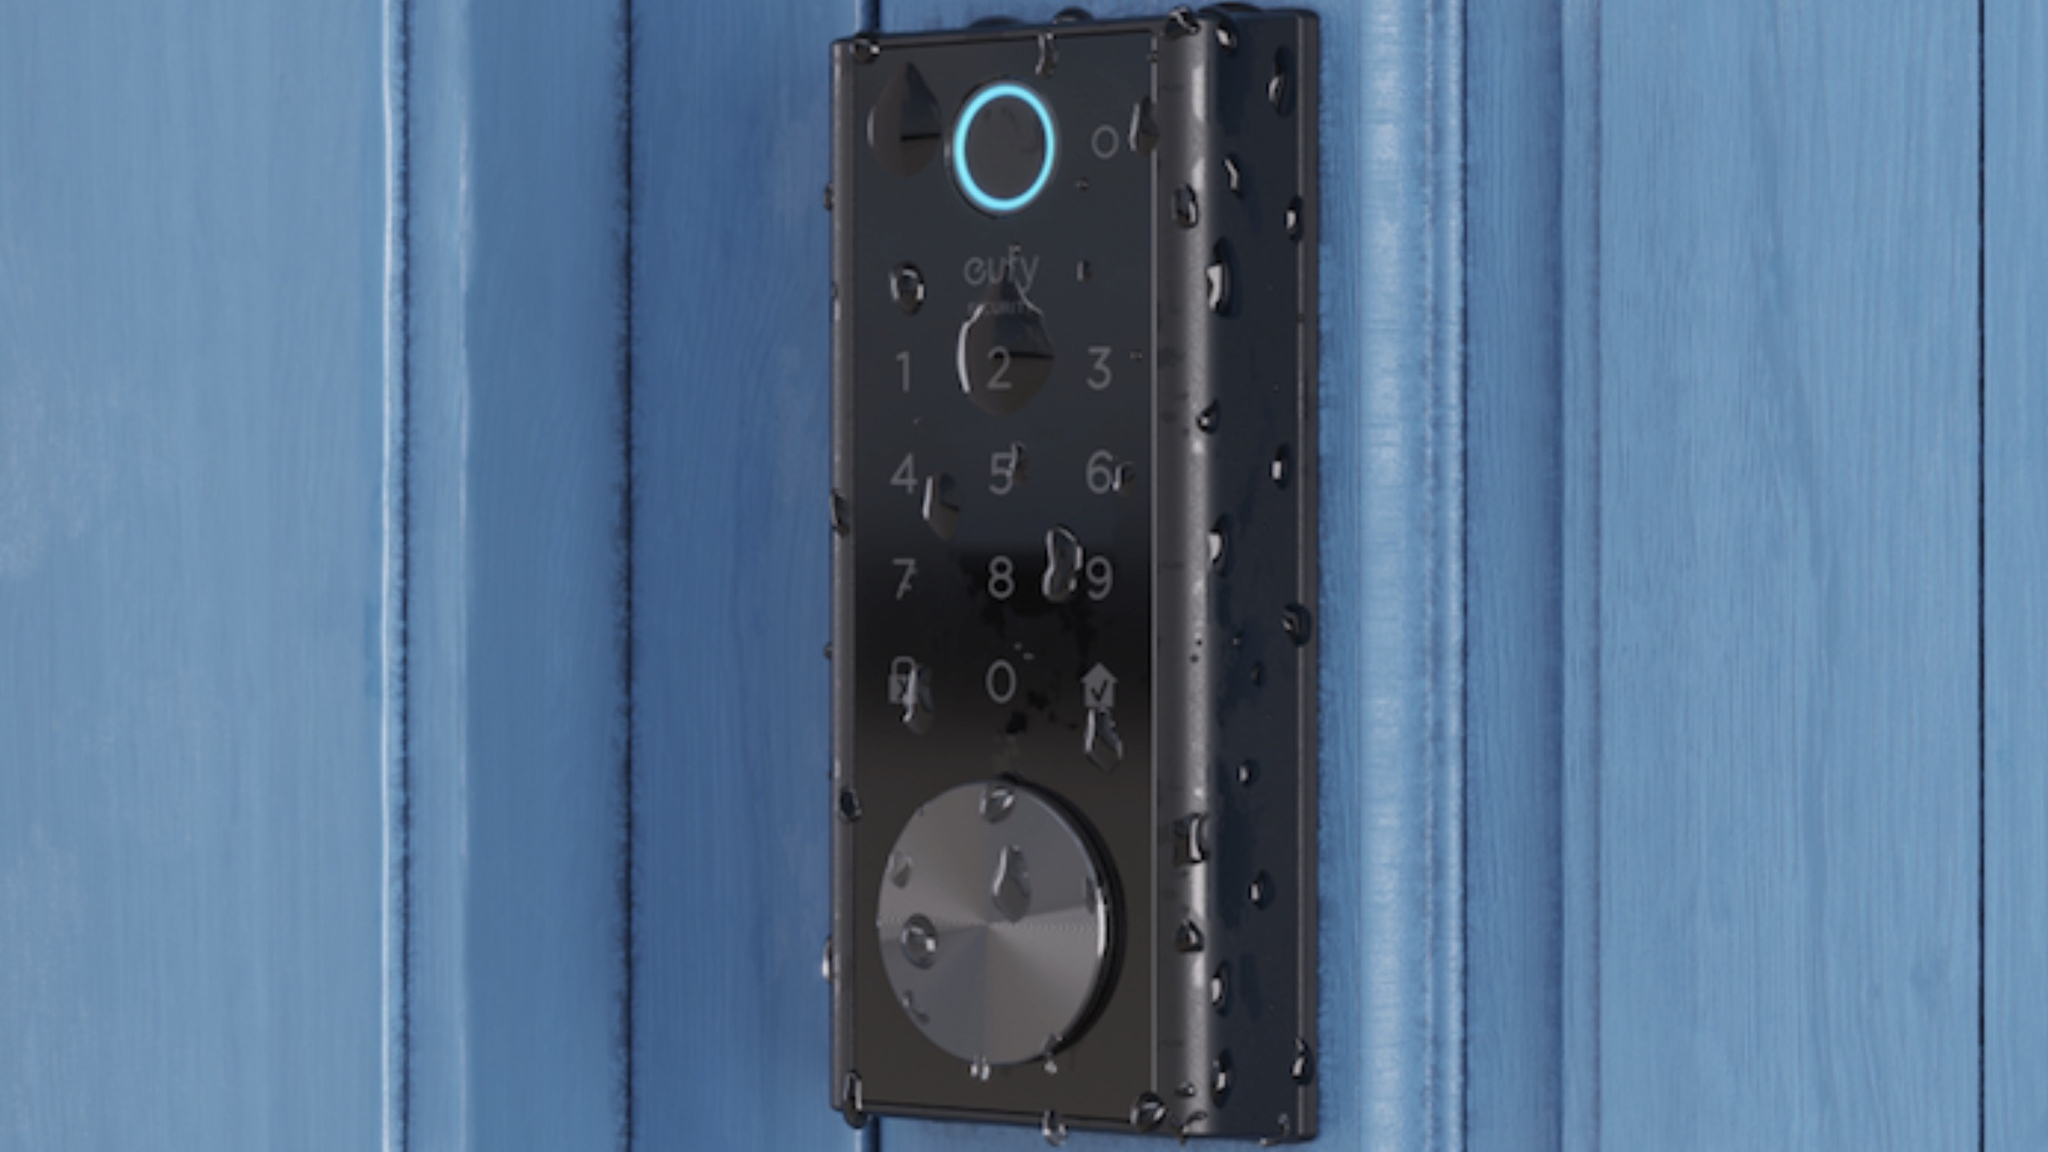 Eufy Smart Lock Touch installed outdoors